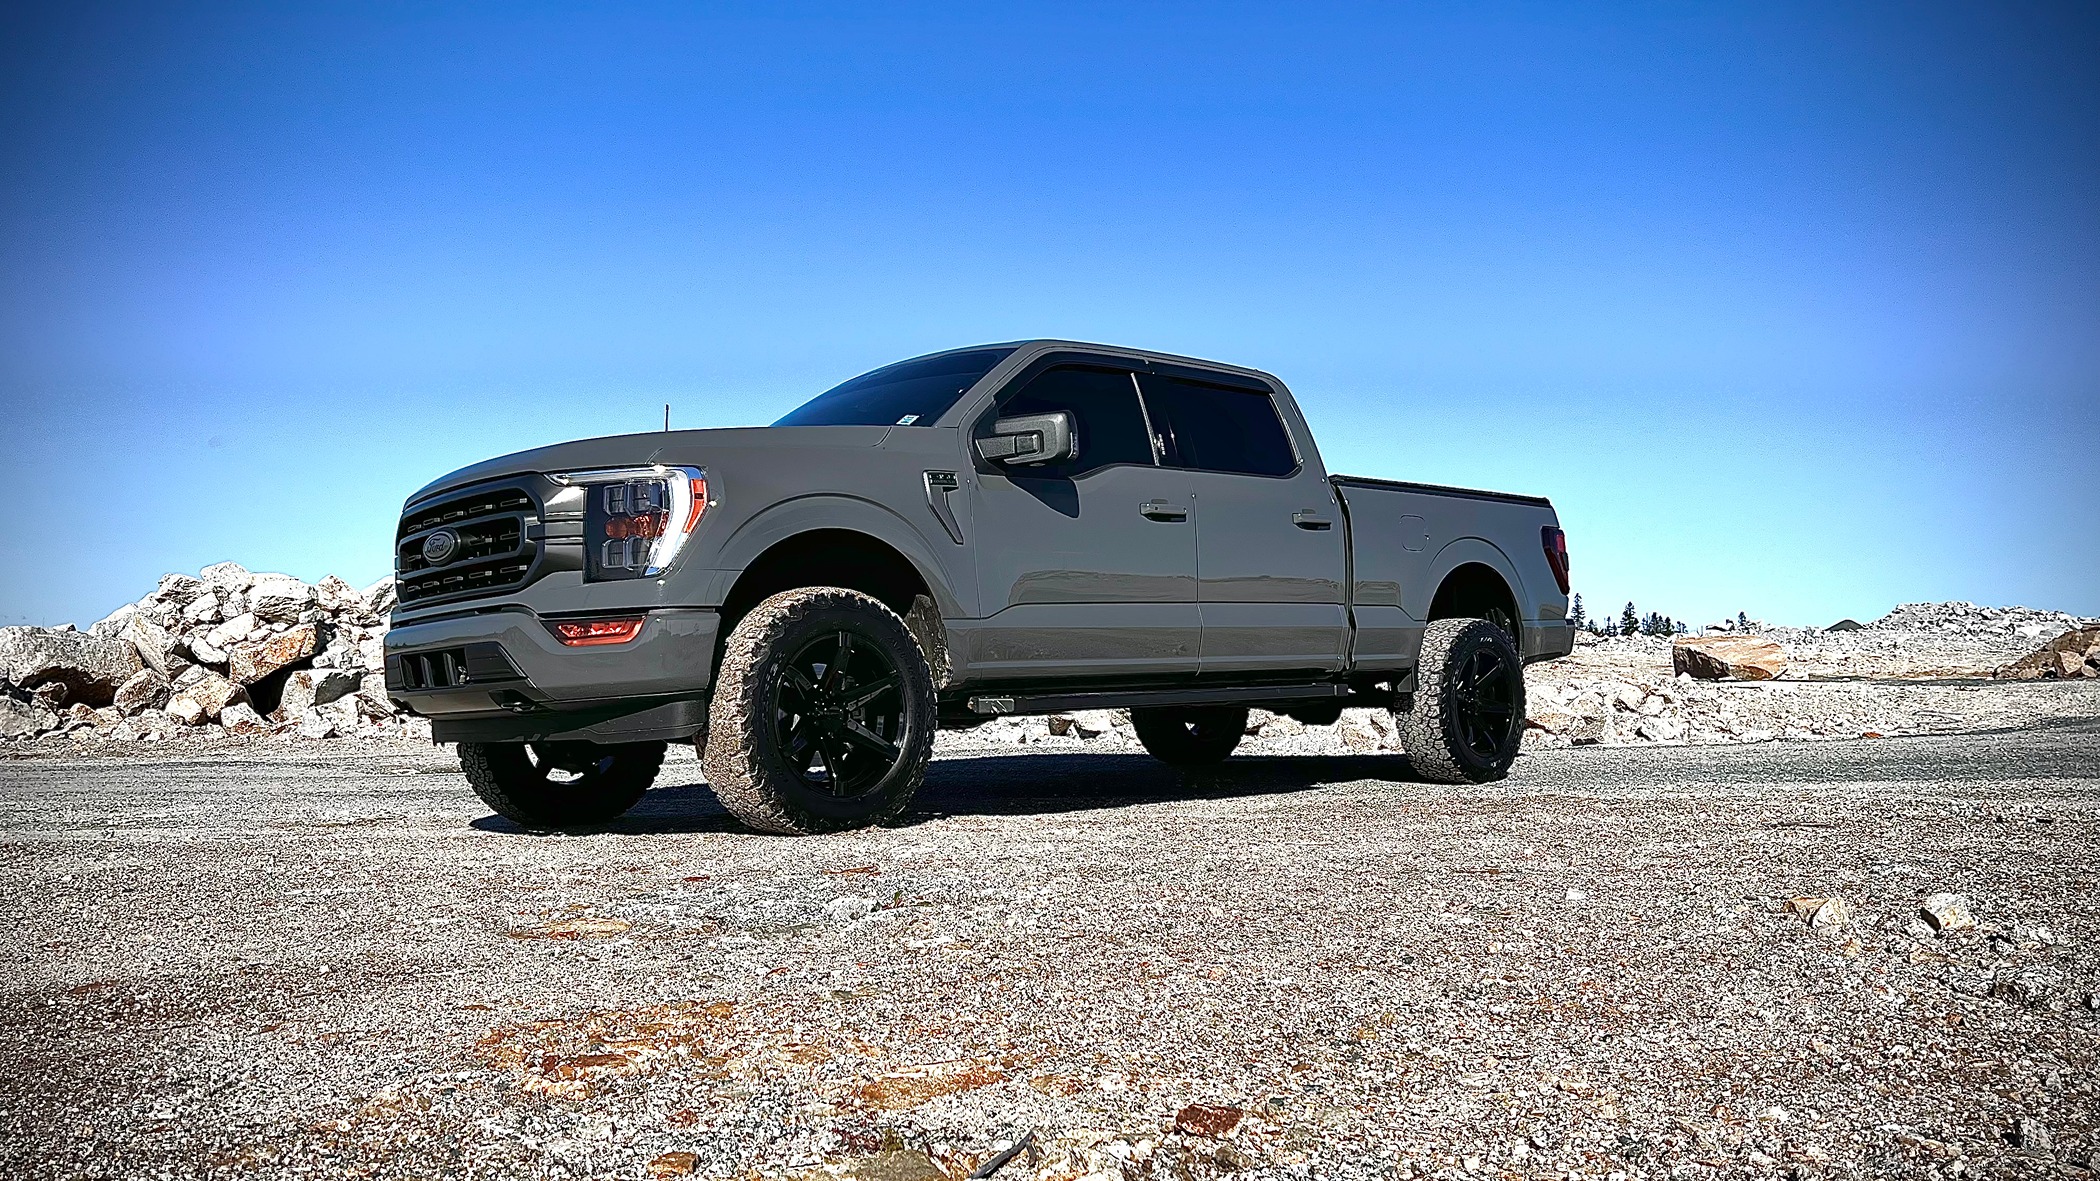 Ford F-150 Random F-150 Photos of the Day - Post Yours! 📸 🤳 IMG_6591